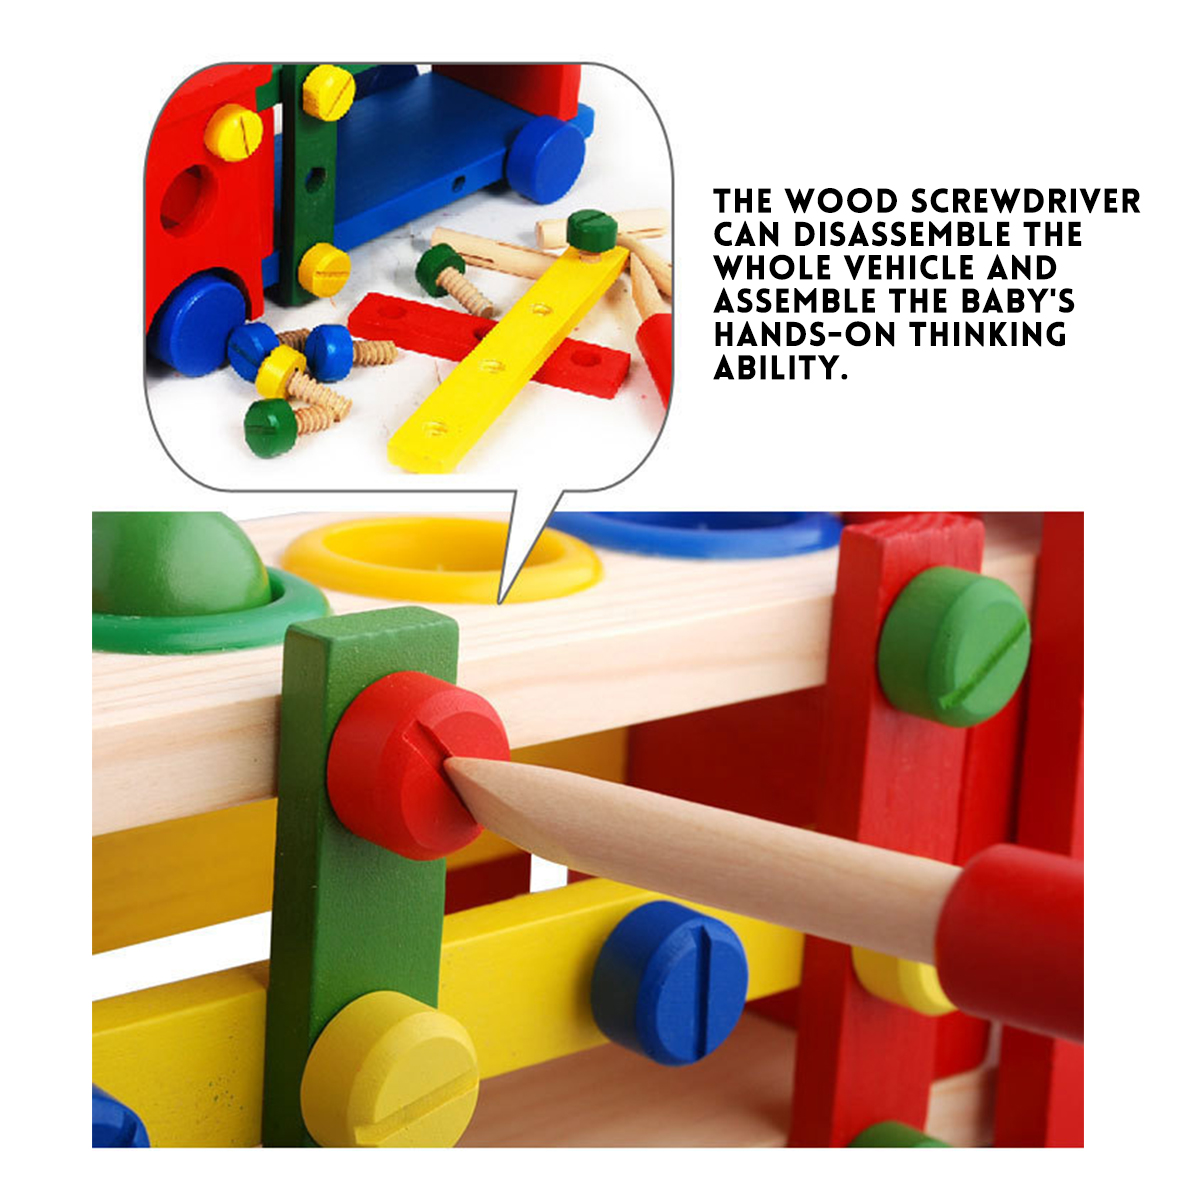 DIY-Educational-Toys-Kids-Exercise-Practical-Wooden-IQ-Game-Car-Assemble-Building-Gift-Training-Brai-1598139-5